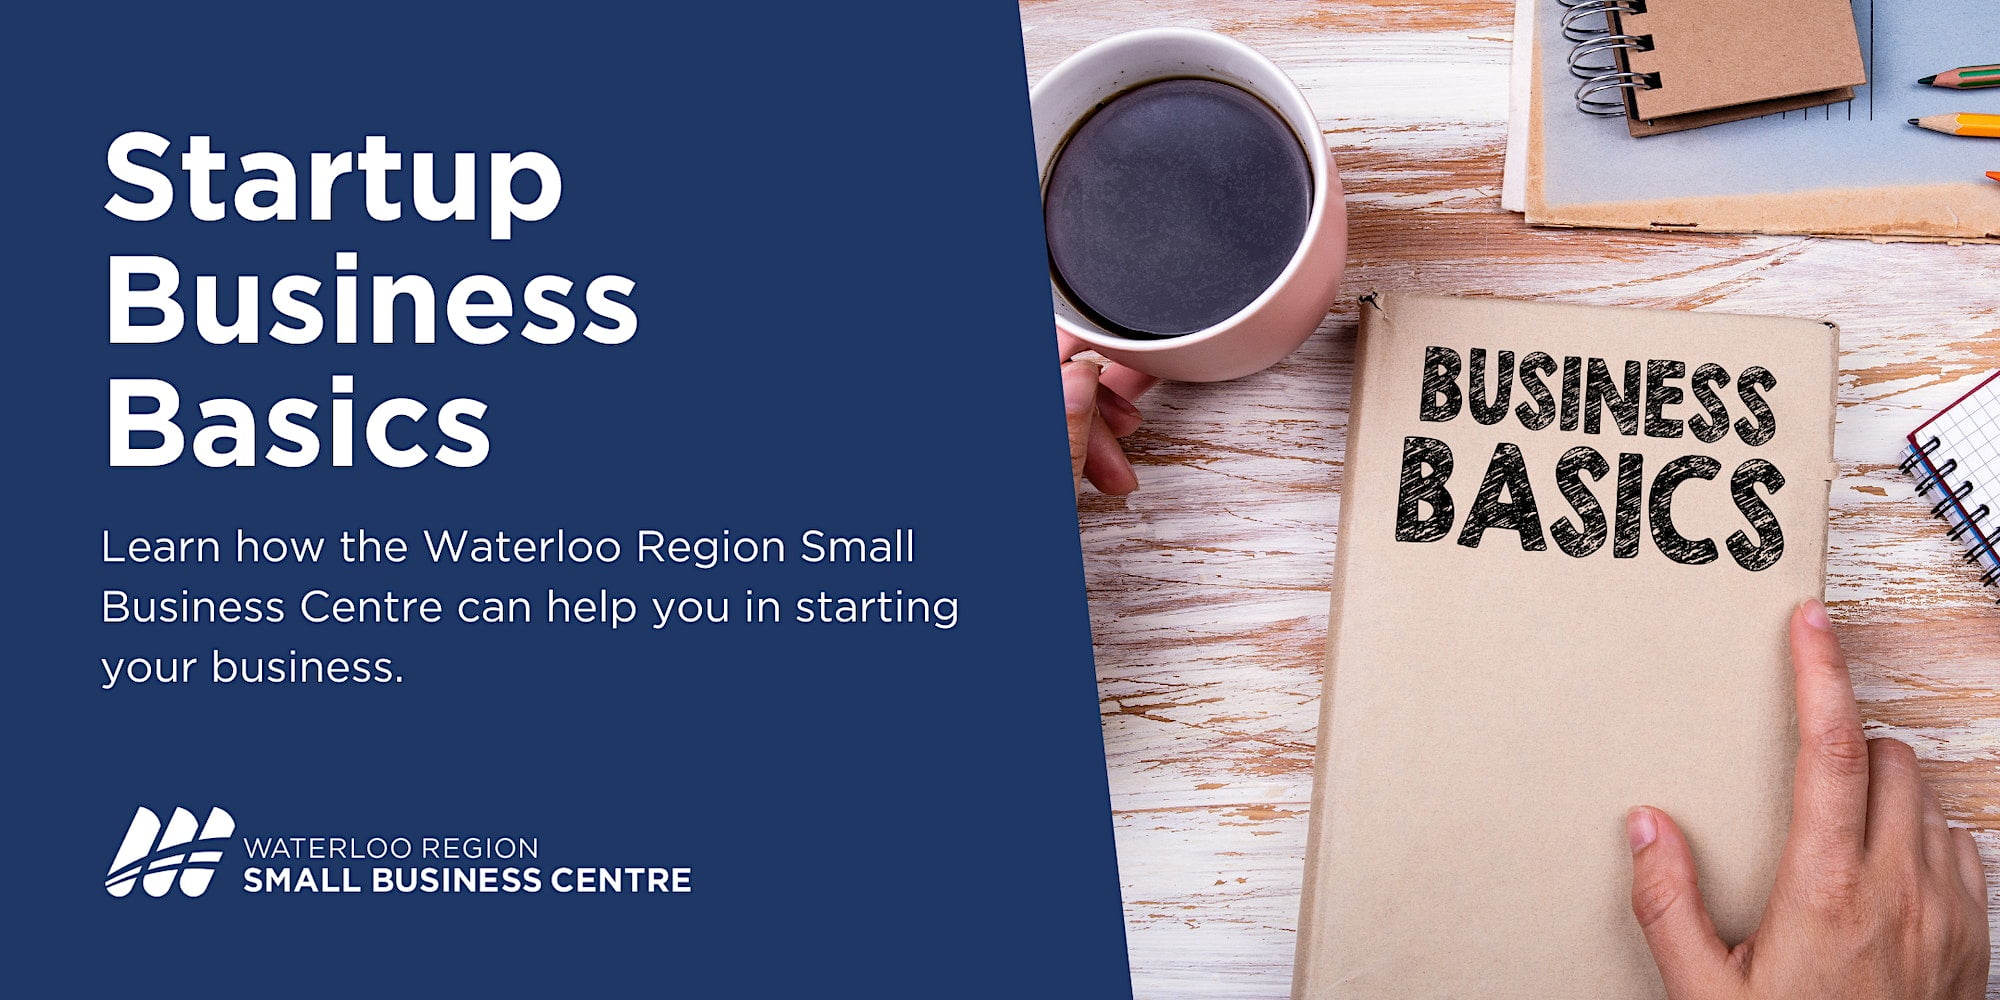 Startup Business Basics webinar series hosting by Waterloo Region Small Business Centre